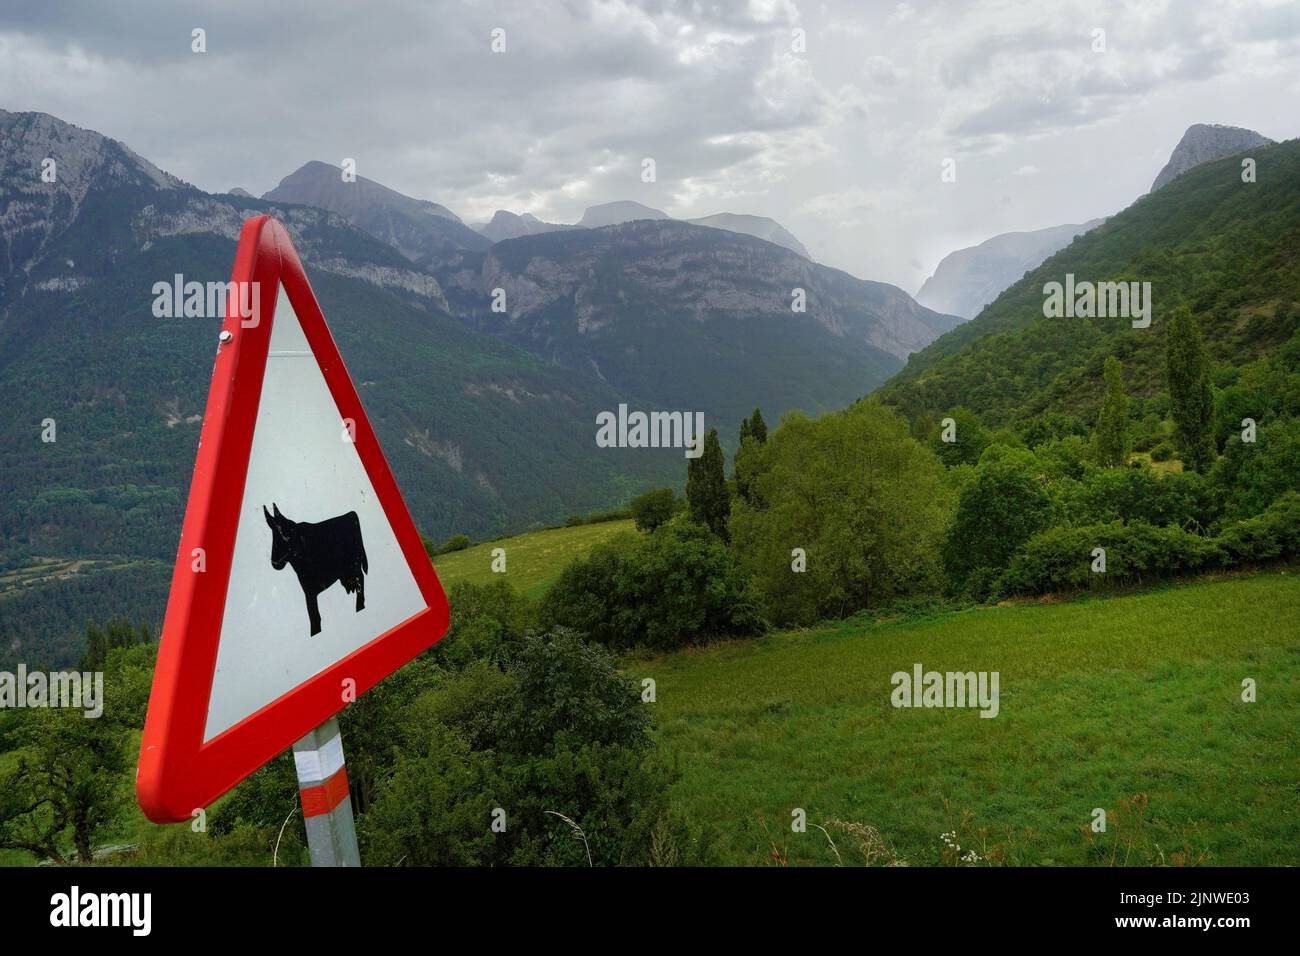 View of a green mountainscape with a danger sign in the foreground featuring a cow silhoutte Stock Photo